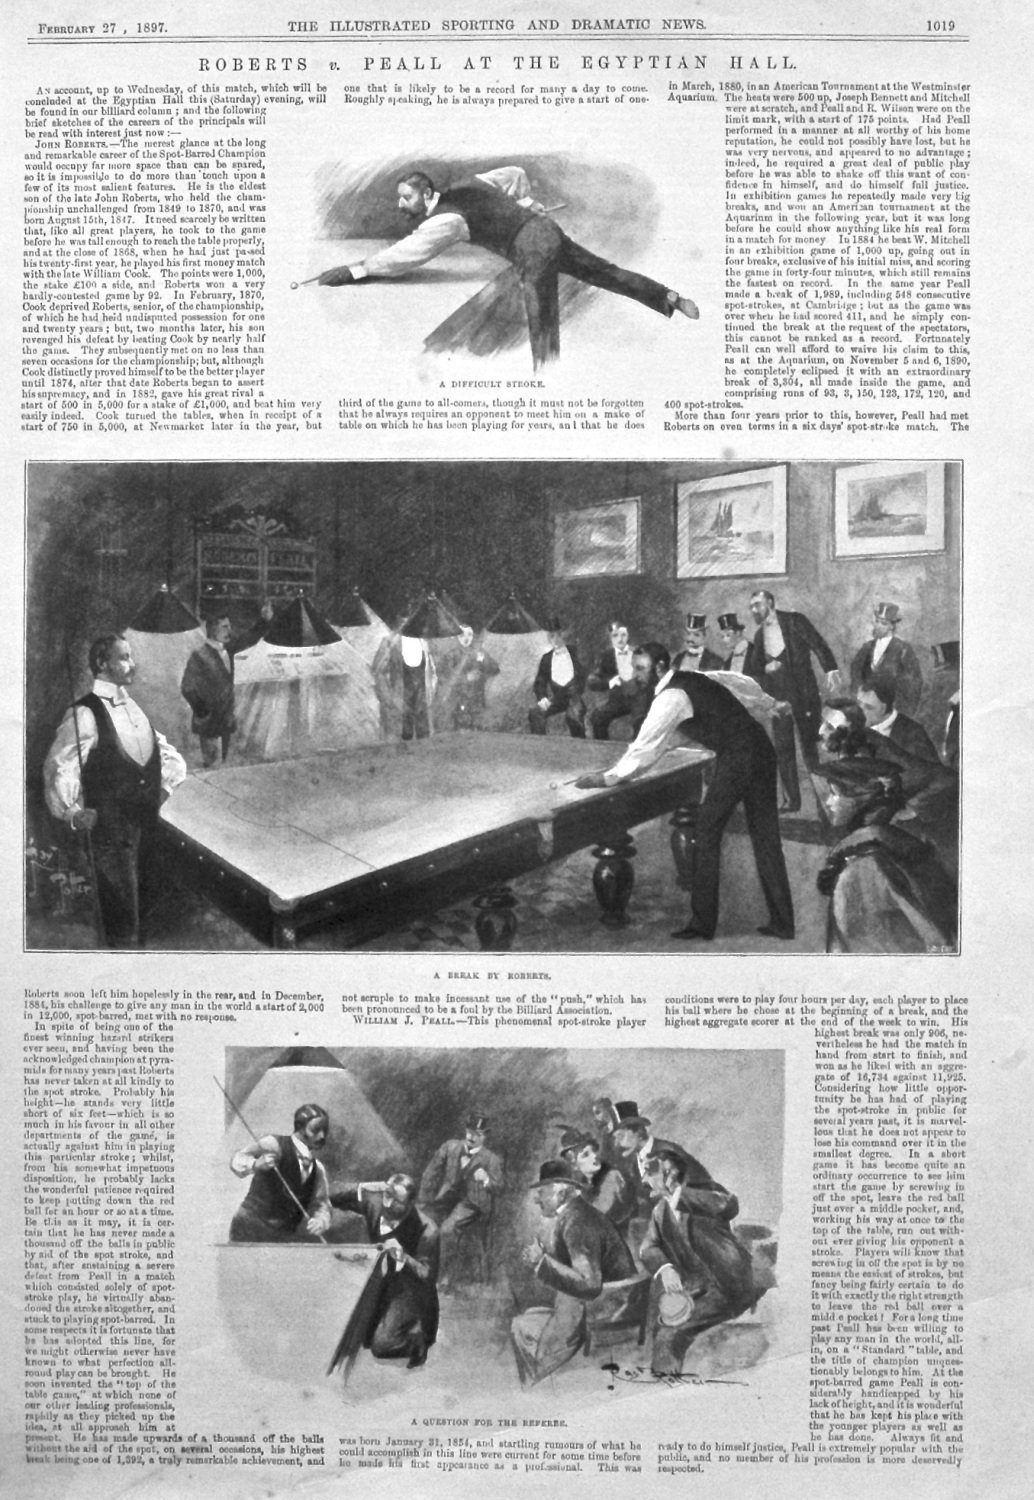 Roberts v. Peall at the Egyptian Hall.  (Billiards). 1897.